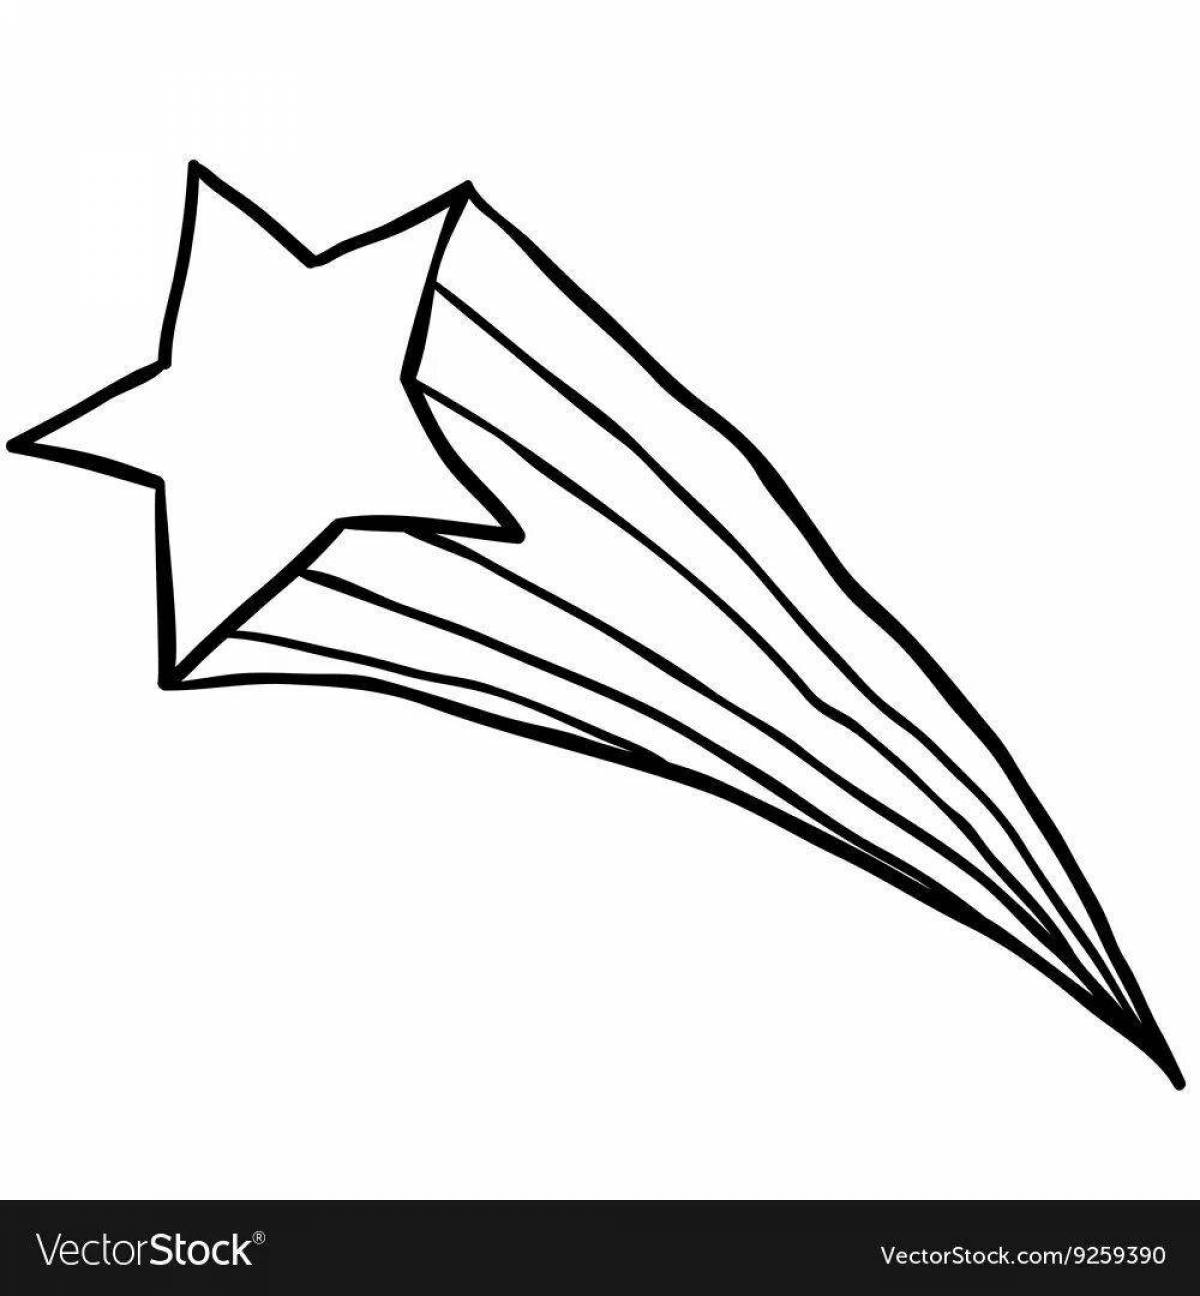 Shiny shooting star coloring page